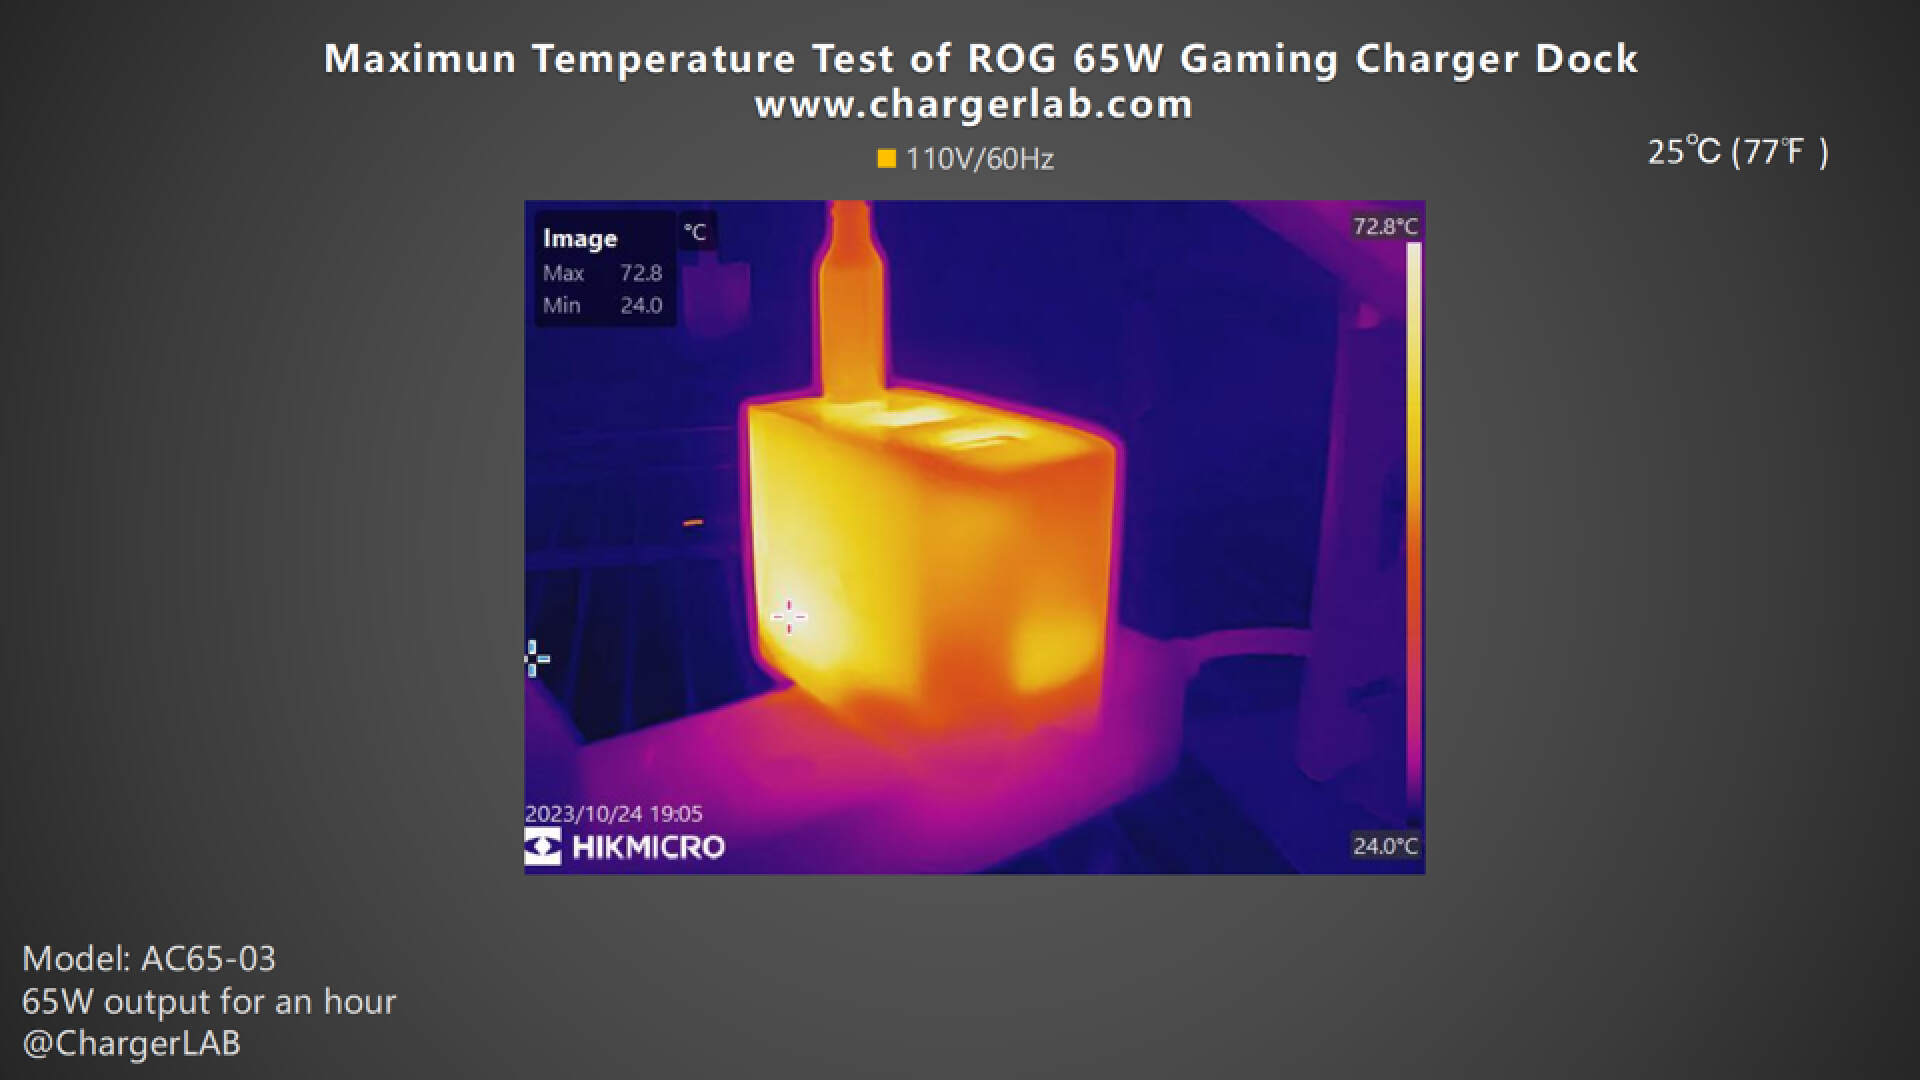 Charging Review of ASUS ROG 65W Gaming Charger Dock-Chargerlab